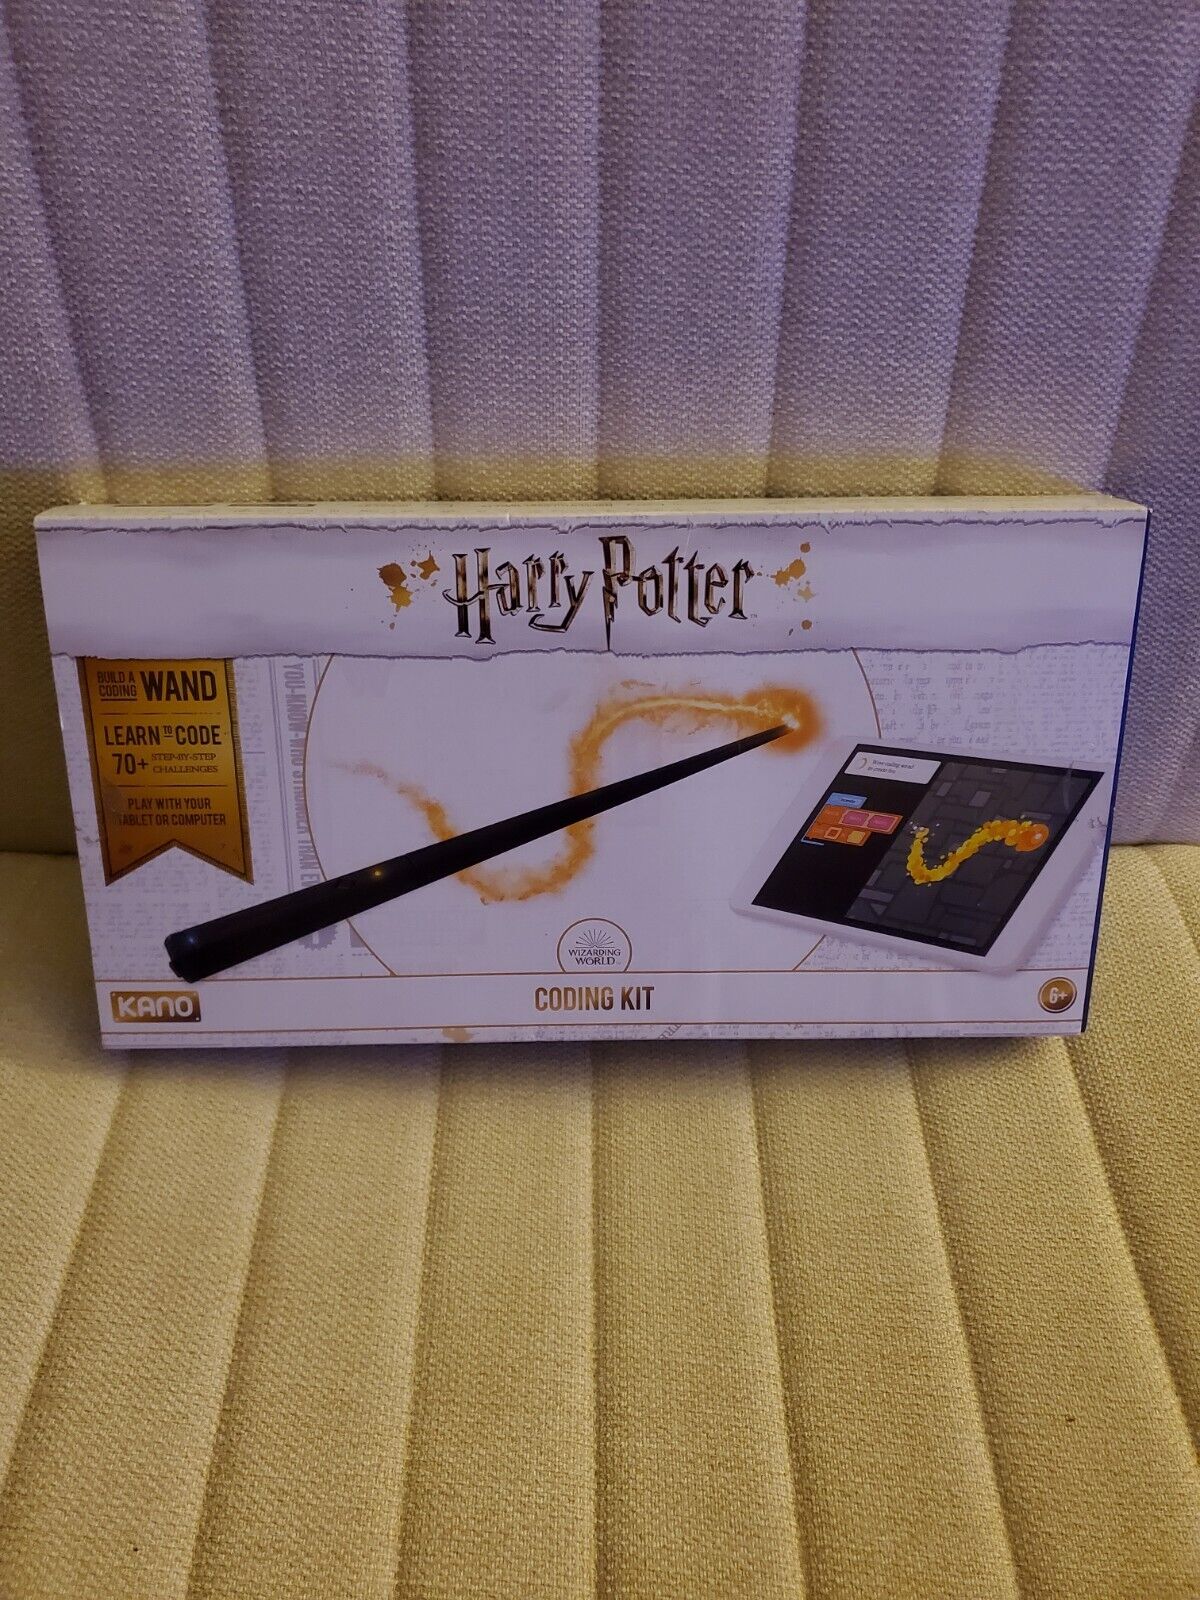 Kano Harry Potter Coding Kit - Build a Wand Learn To Code New In Box